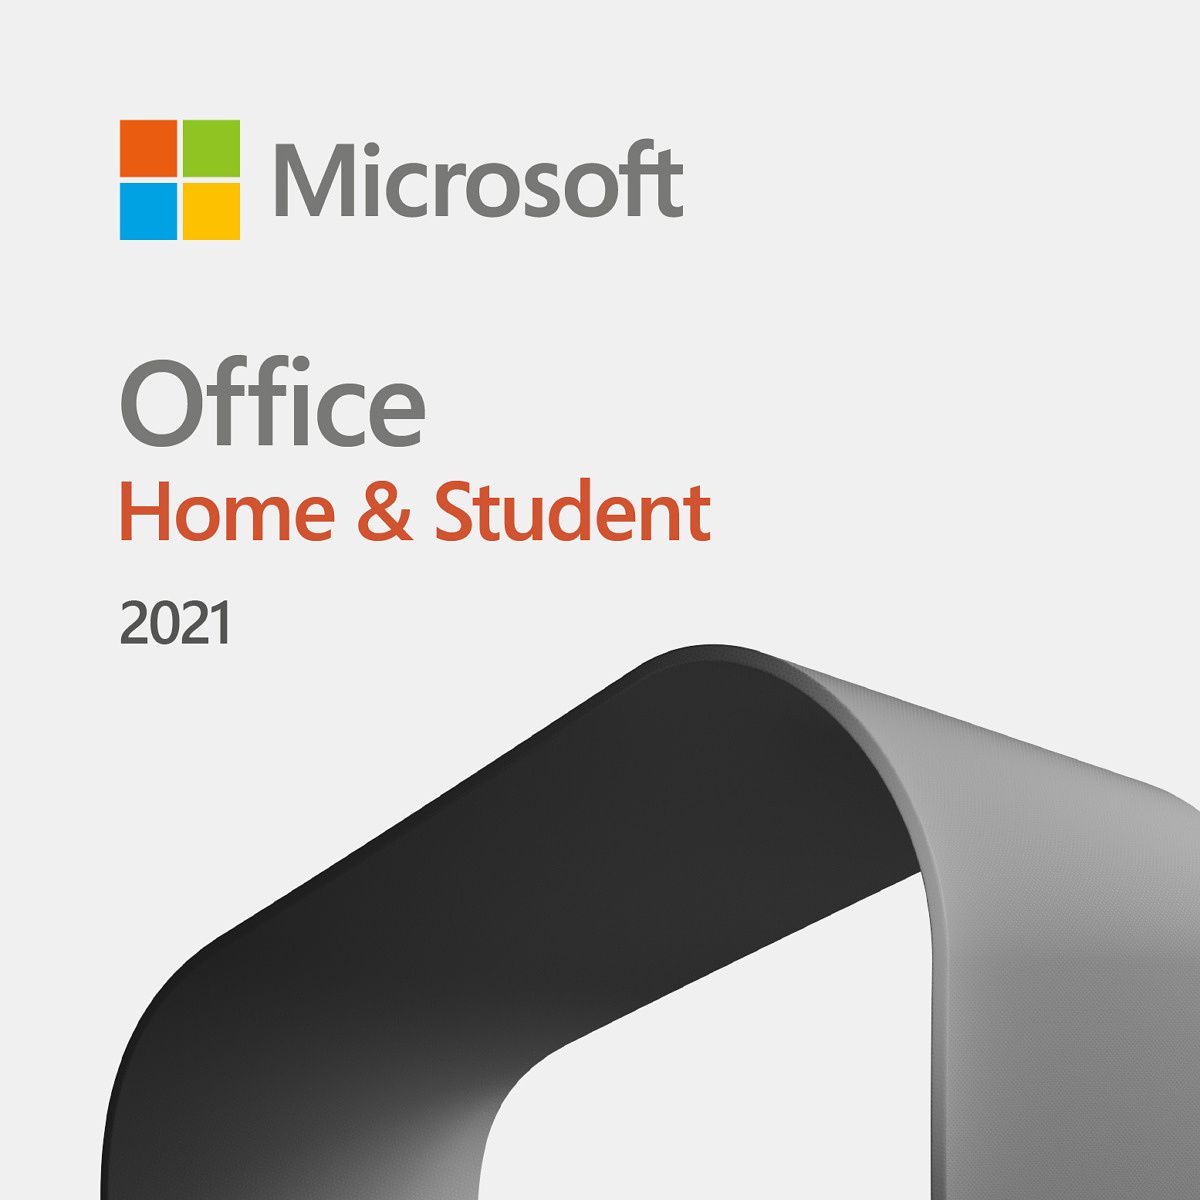 This gives you access to Office 2021 on one Mac or PC for no recurring cost.